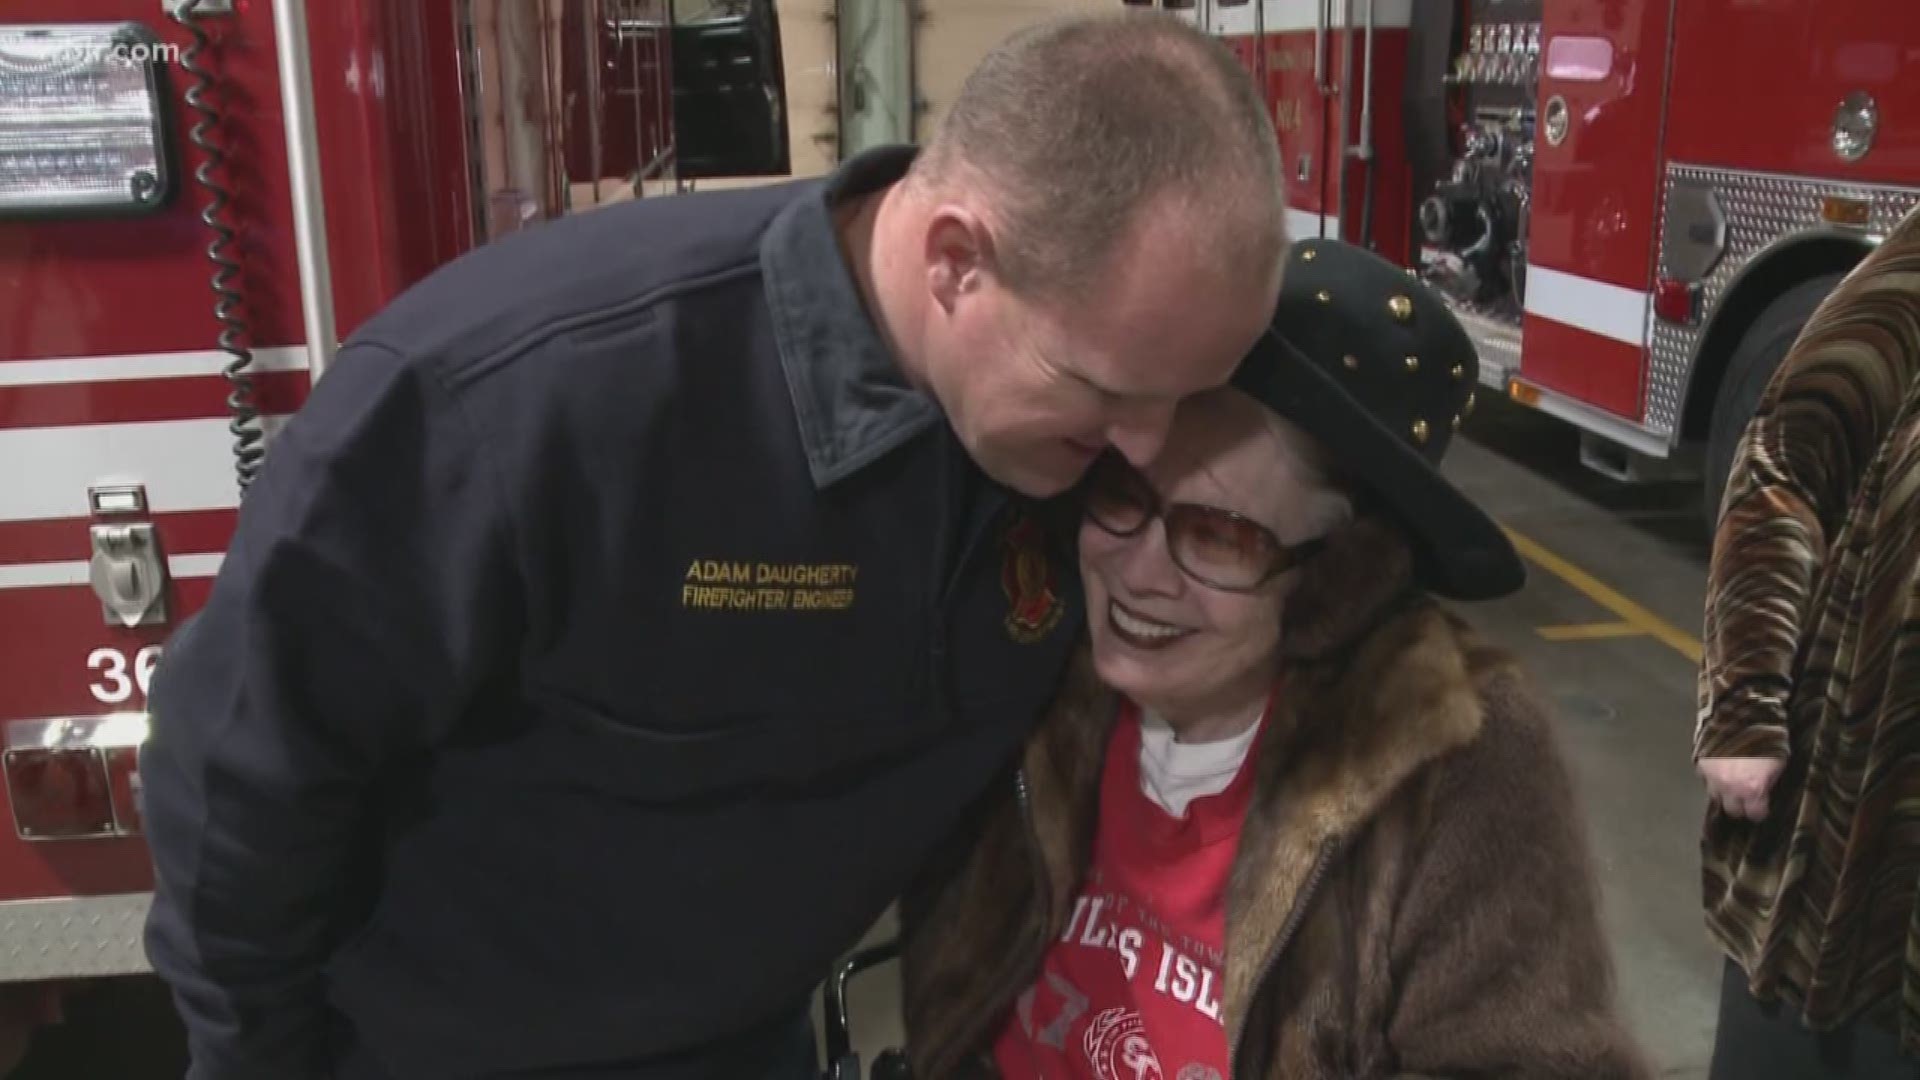 A life saving effort by first responders led to an emotional reunion tonight. The woman saved from this car accident made it a point to thank the brave responders